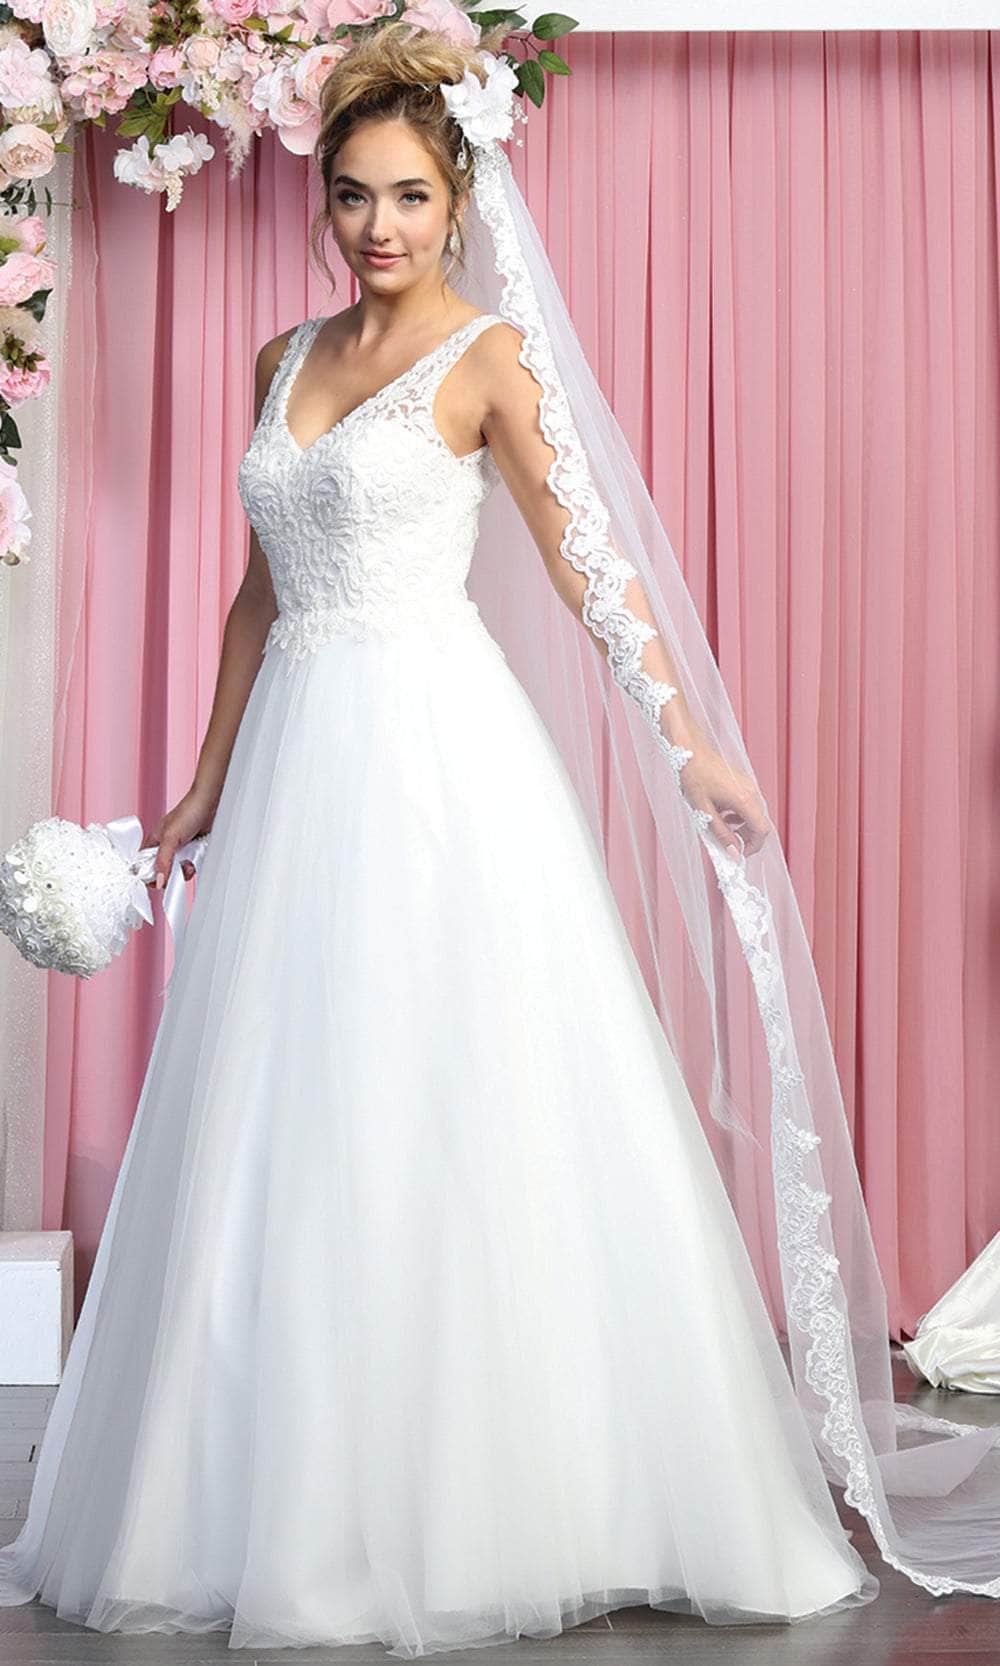 May Queen RQ7883 - Sleeveless V-neck Wedding Gown Wedding Dresses